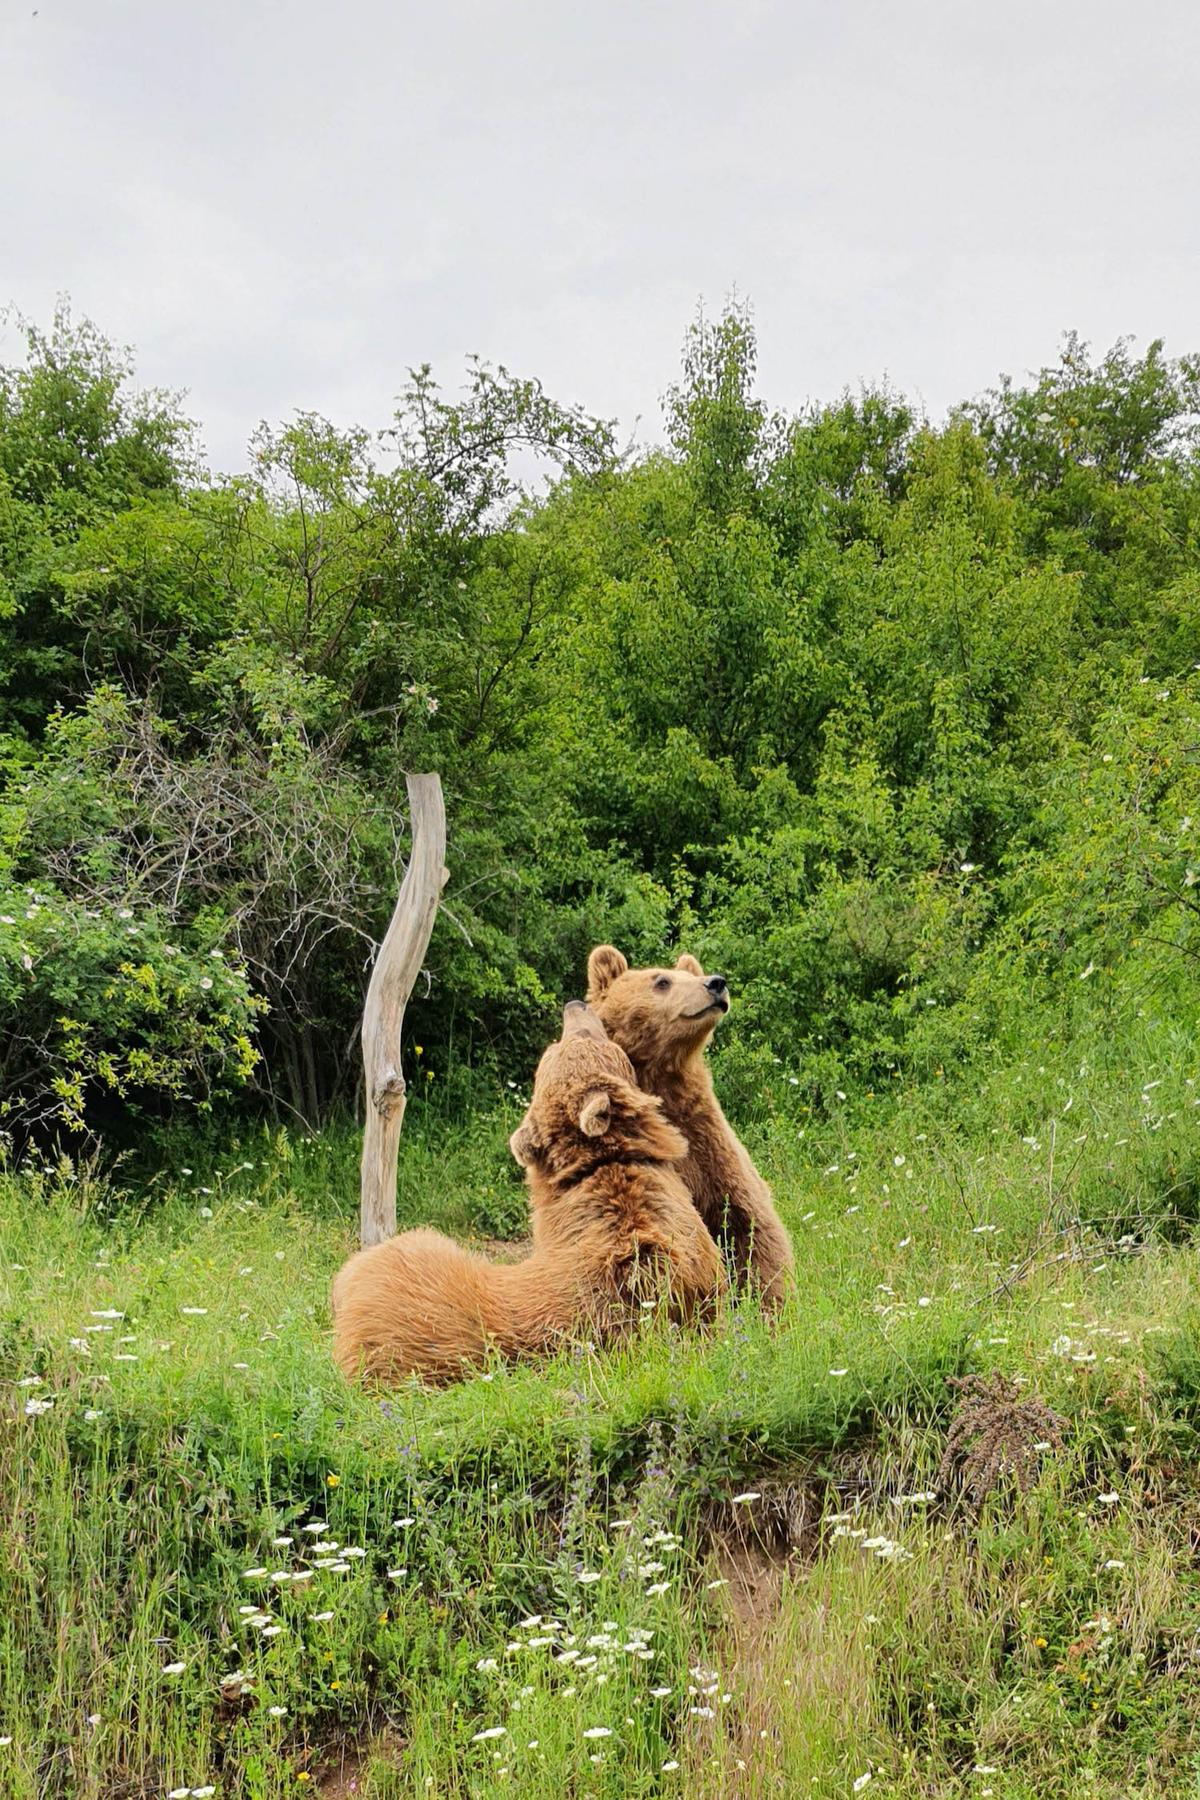 Bears Pashuk and Gjina are now thriving. (Caters News)